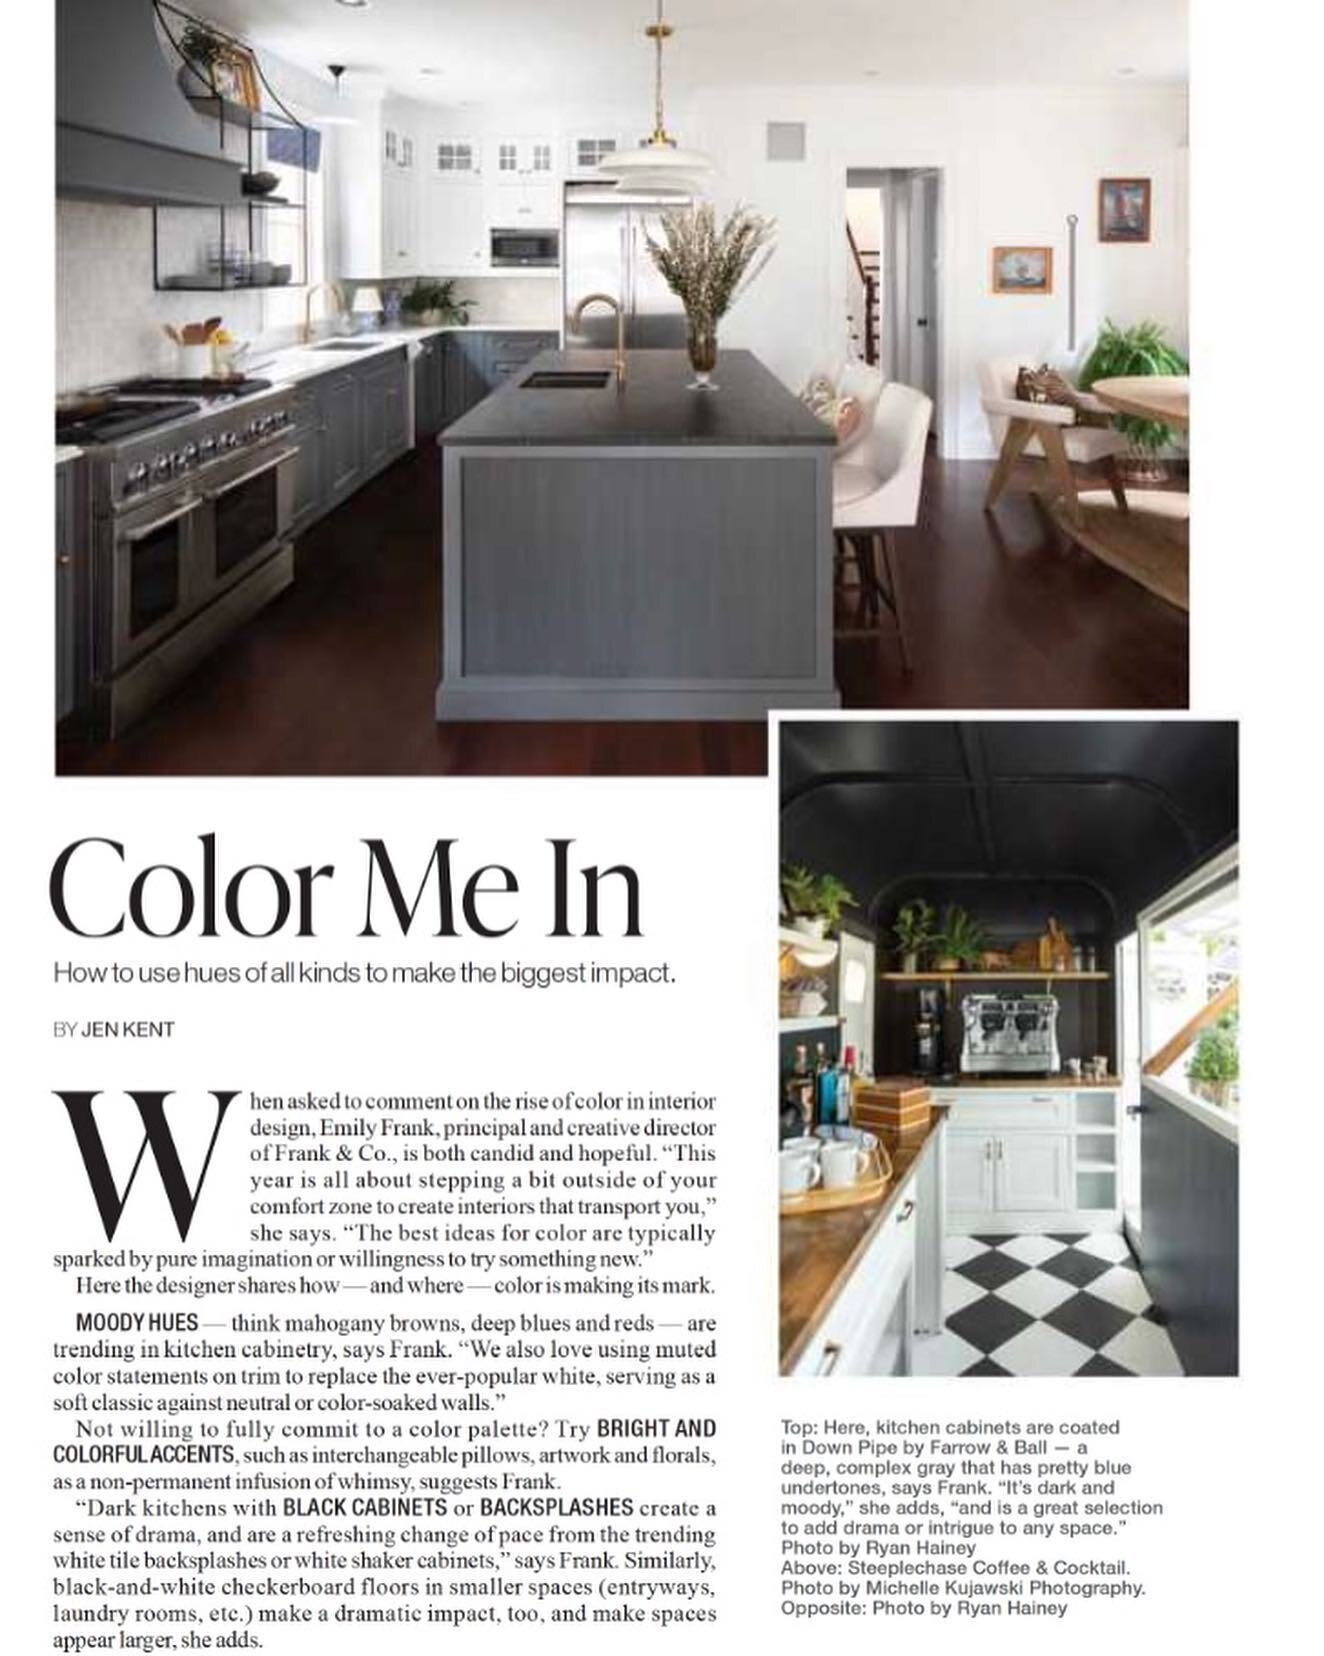 [ MKE Lifestyle Magazine Feature ]

Let&rsquo;s talk color! Sharing my thoughts on when and where color is making its mark in interiors.

Also dishing on some of my favorite paint colors🖤 Check out the June MKE Lifestyle issue for all the details.

